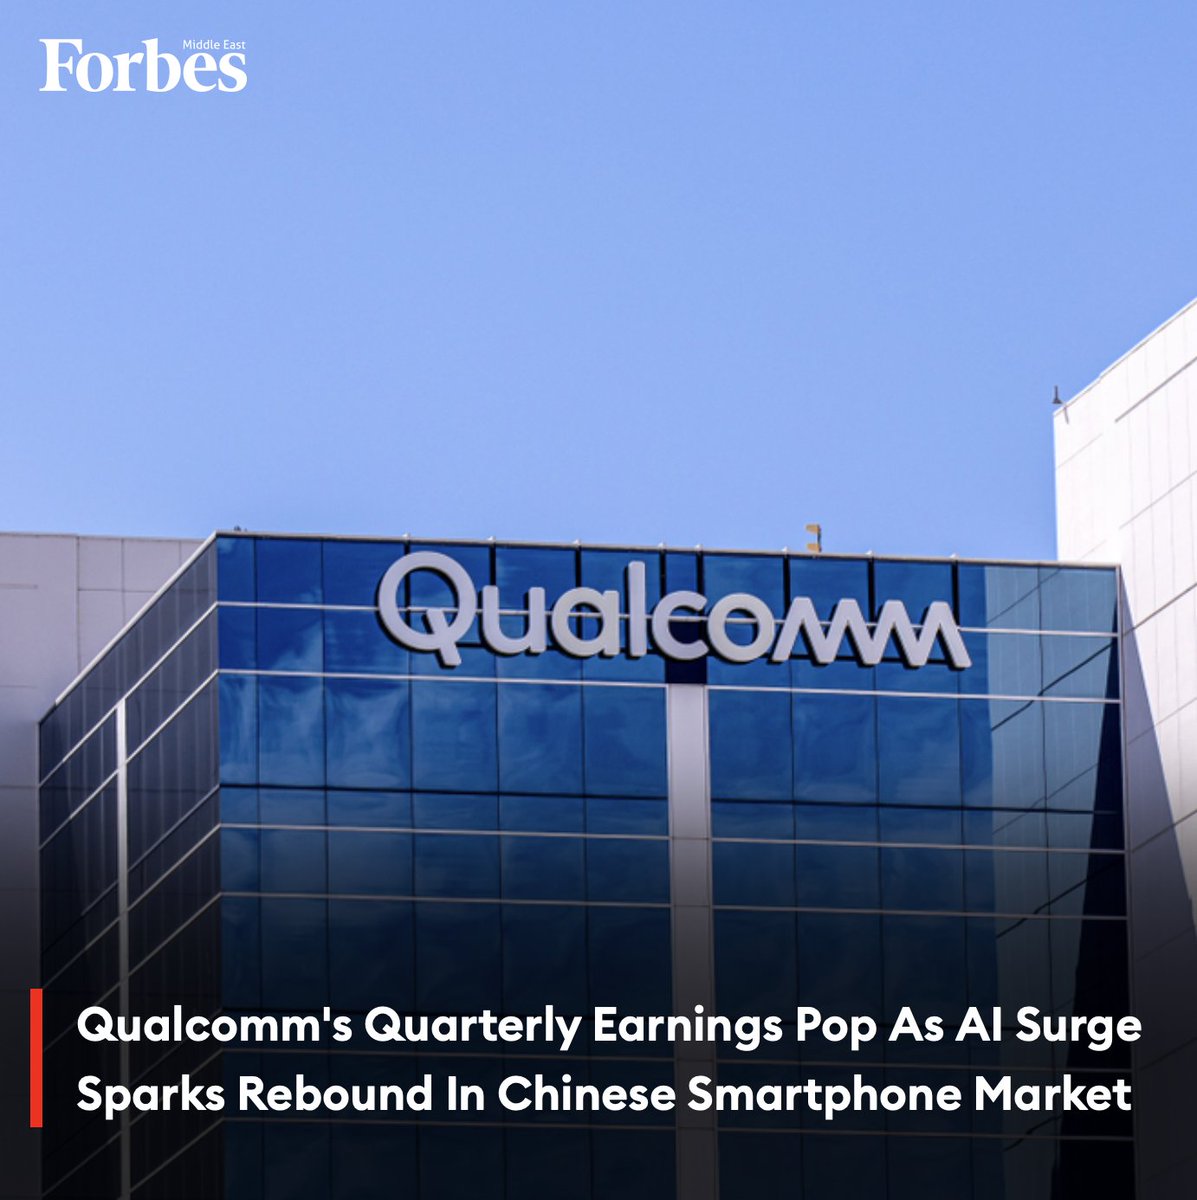 #Qualcomm reported a 37% year-on-year surge in second-quarter net income to $2.3 billion, propelled by an AI-fueled rebound in the Chinese smartphone market. #Forbes For more details: 🔗 on.forbesmiddleeast.com/kymh